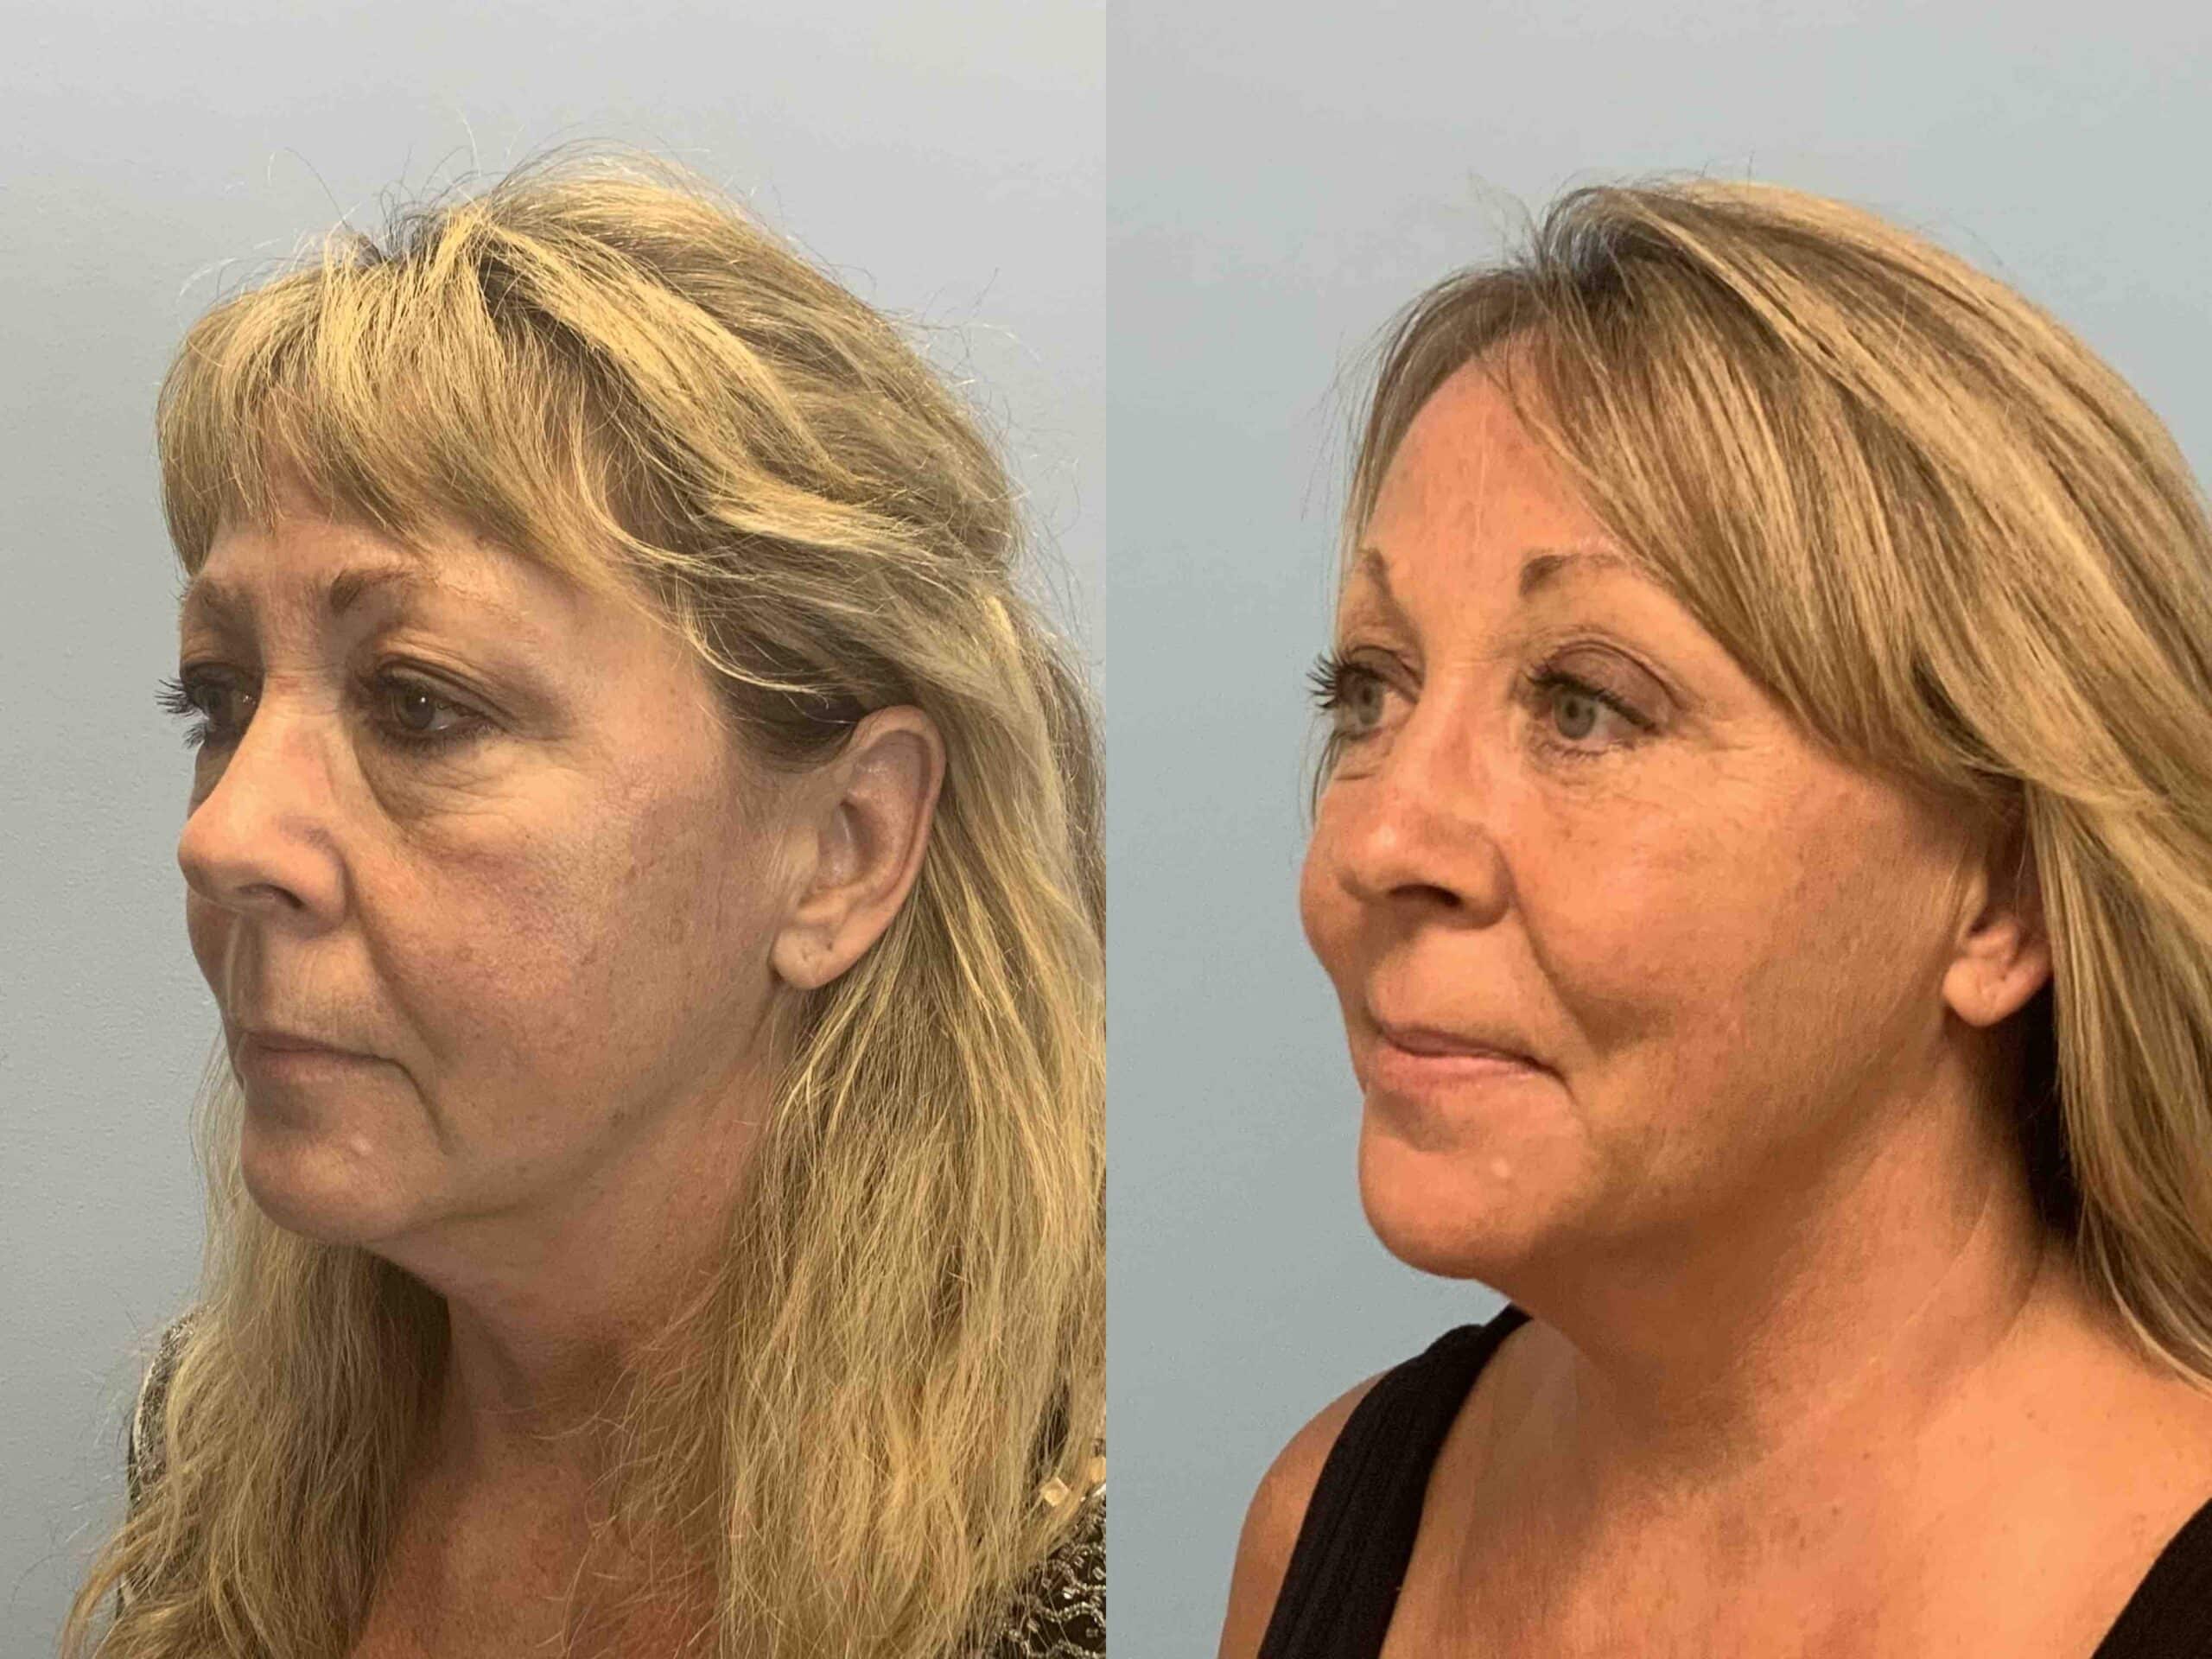 Before and after, 1 year/8 mo post op from Upper and Lower Blepharoplasty, Autologous Fat Transfer to Face, Endo Brow Lift performed by Dr. Paul Vanek (diagonal view)